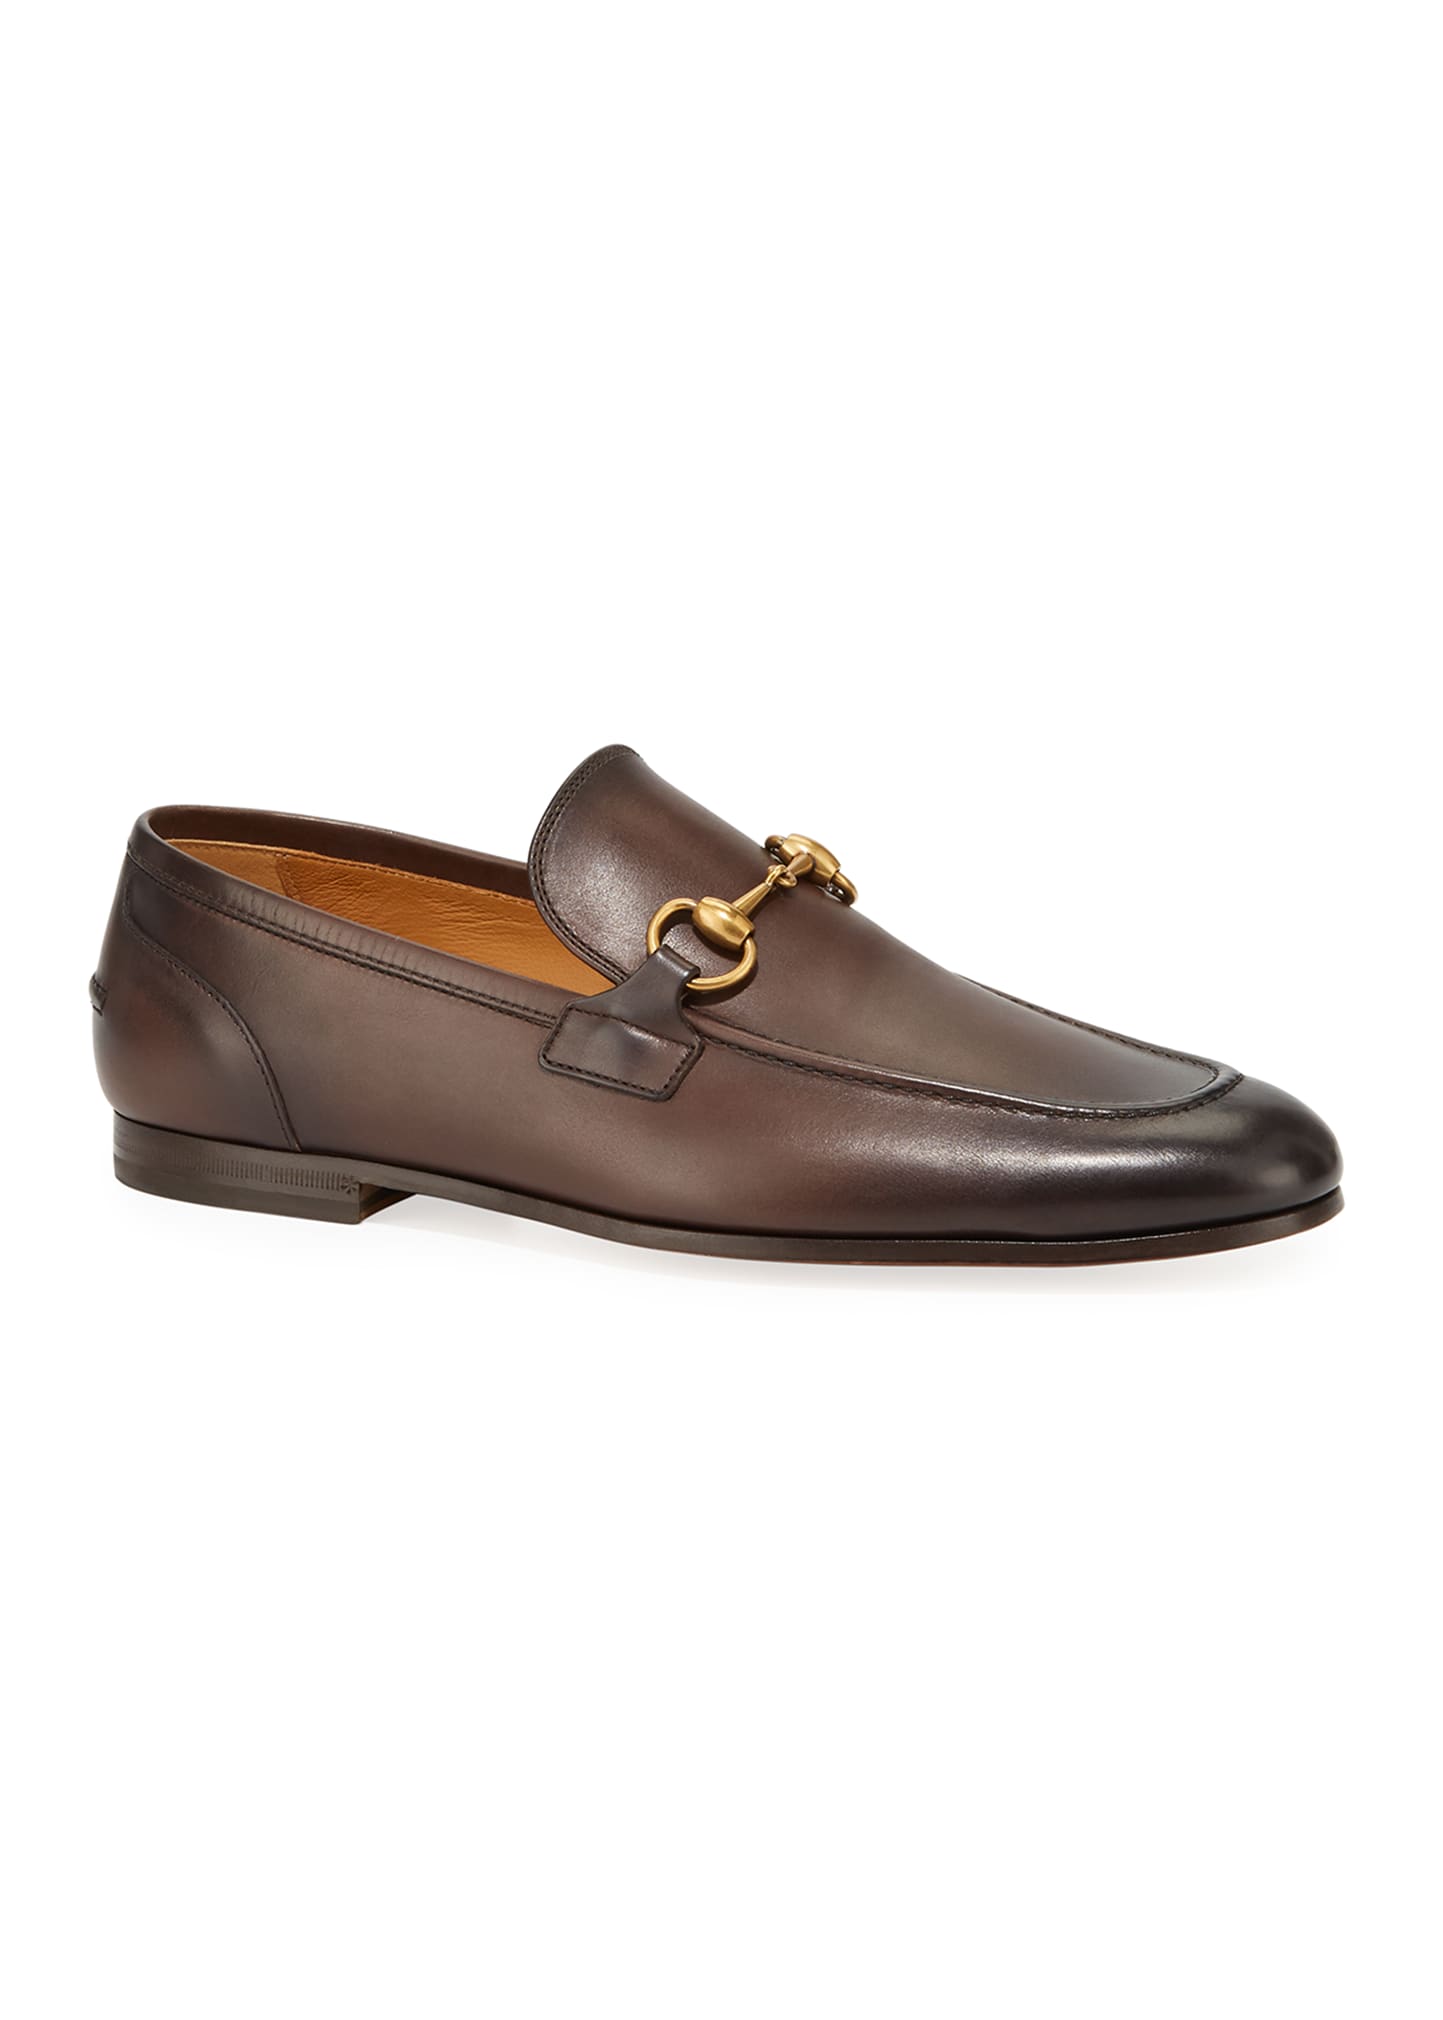 Gucci Jordaan Leather Loafer In Fondente